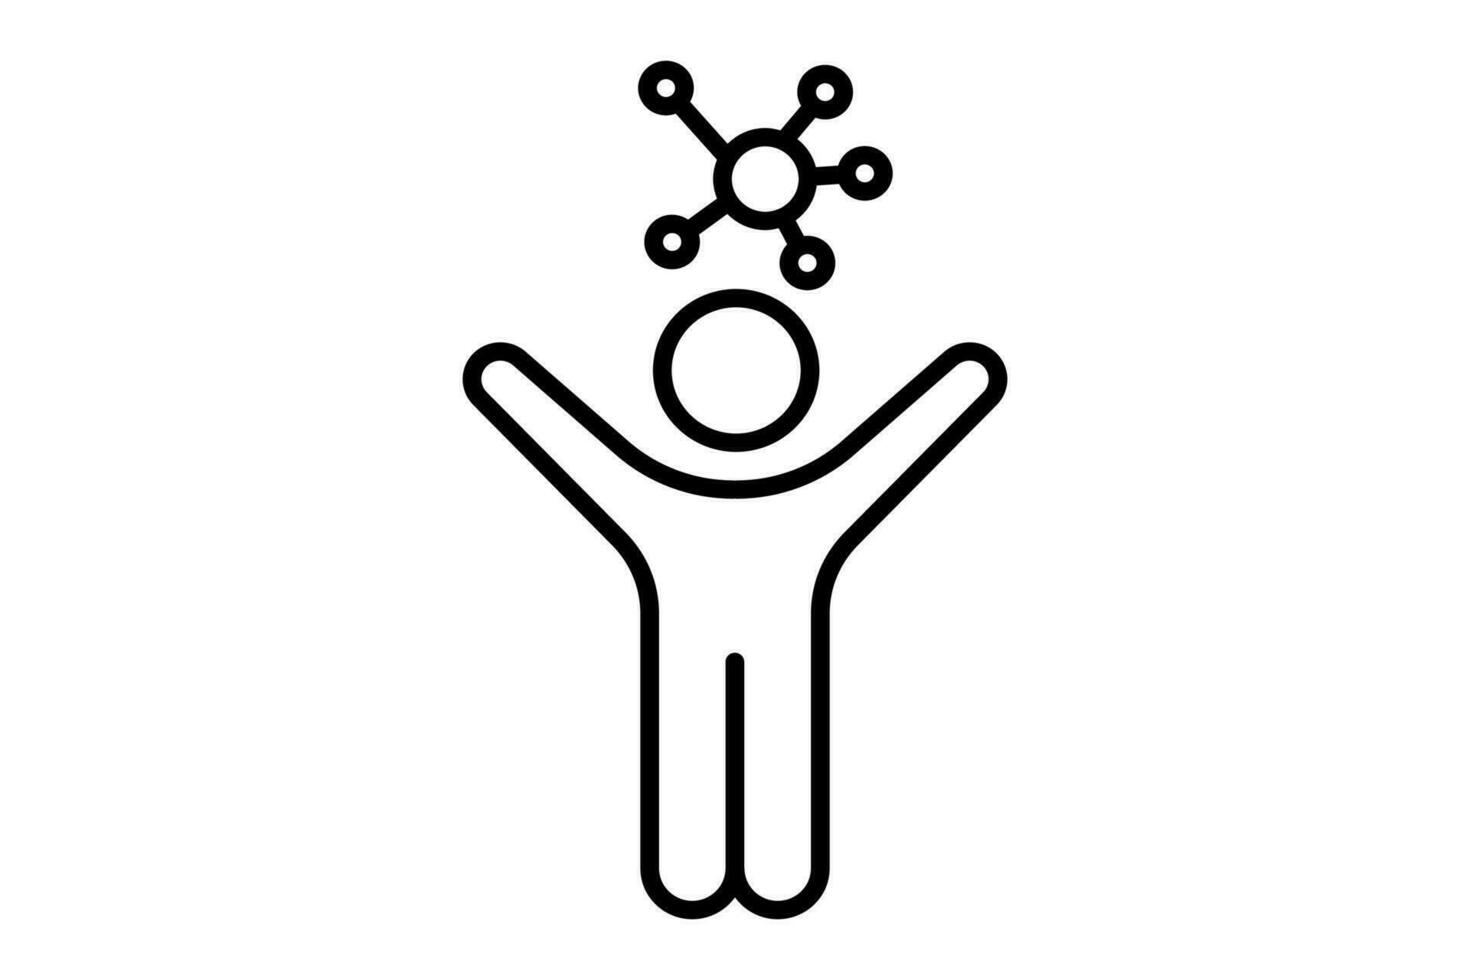 humanoid icon. people with network. icon related to affiliate intelligence, device, computer technology. line icon style. simple vector design editable